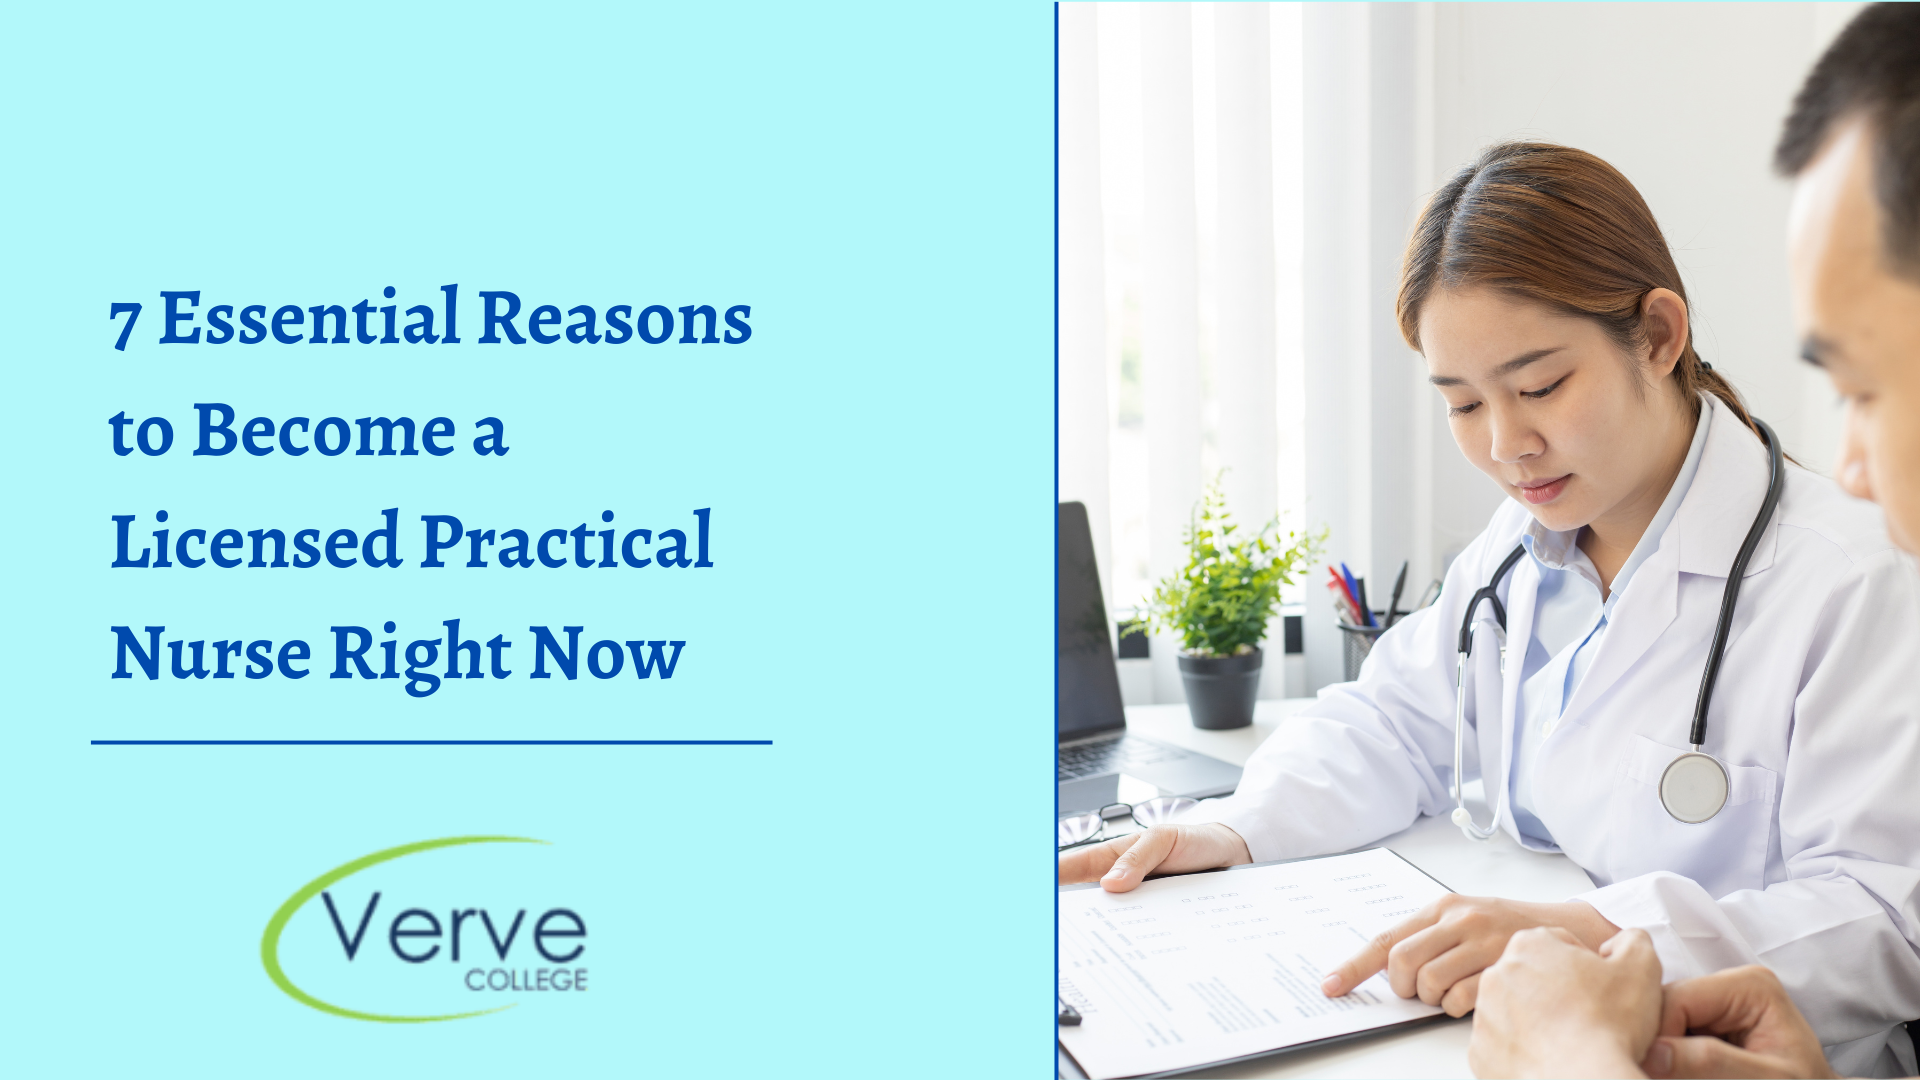 Top 7 Reasons to Become a Licensed Practical Nurse Right Now